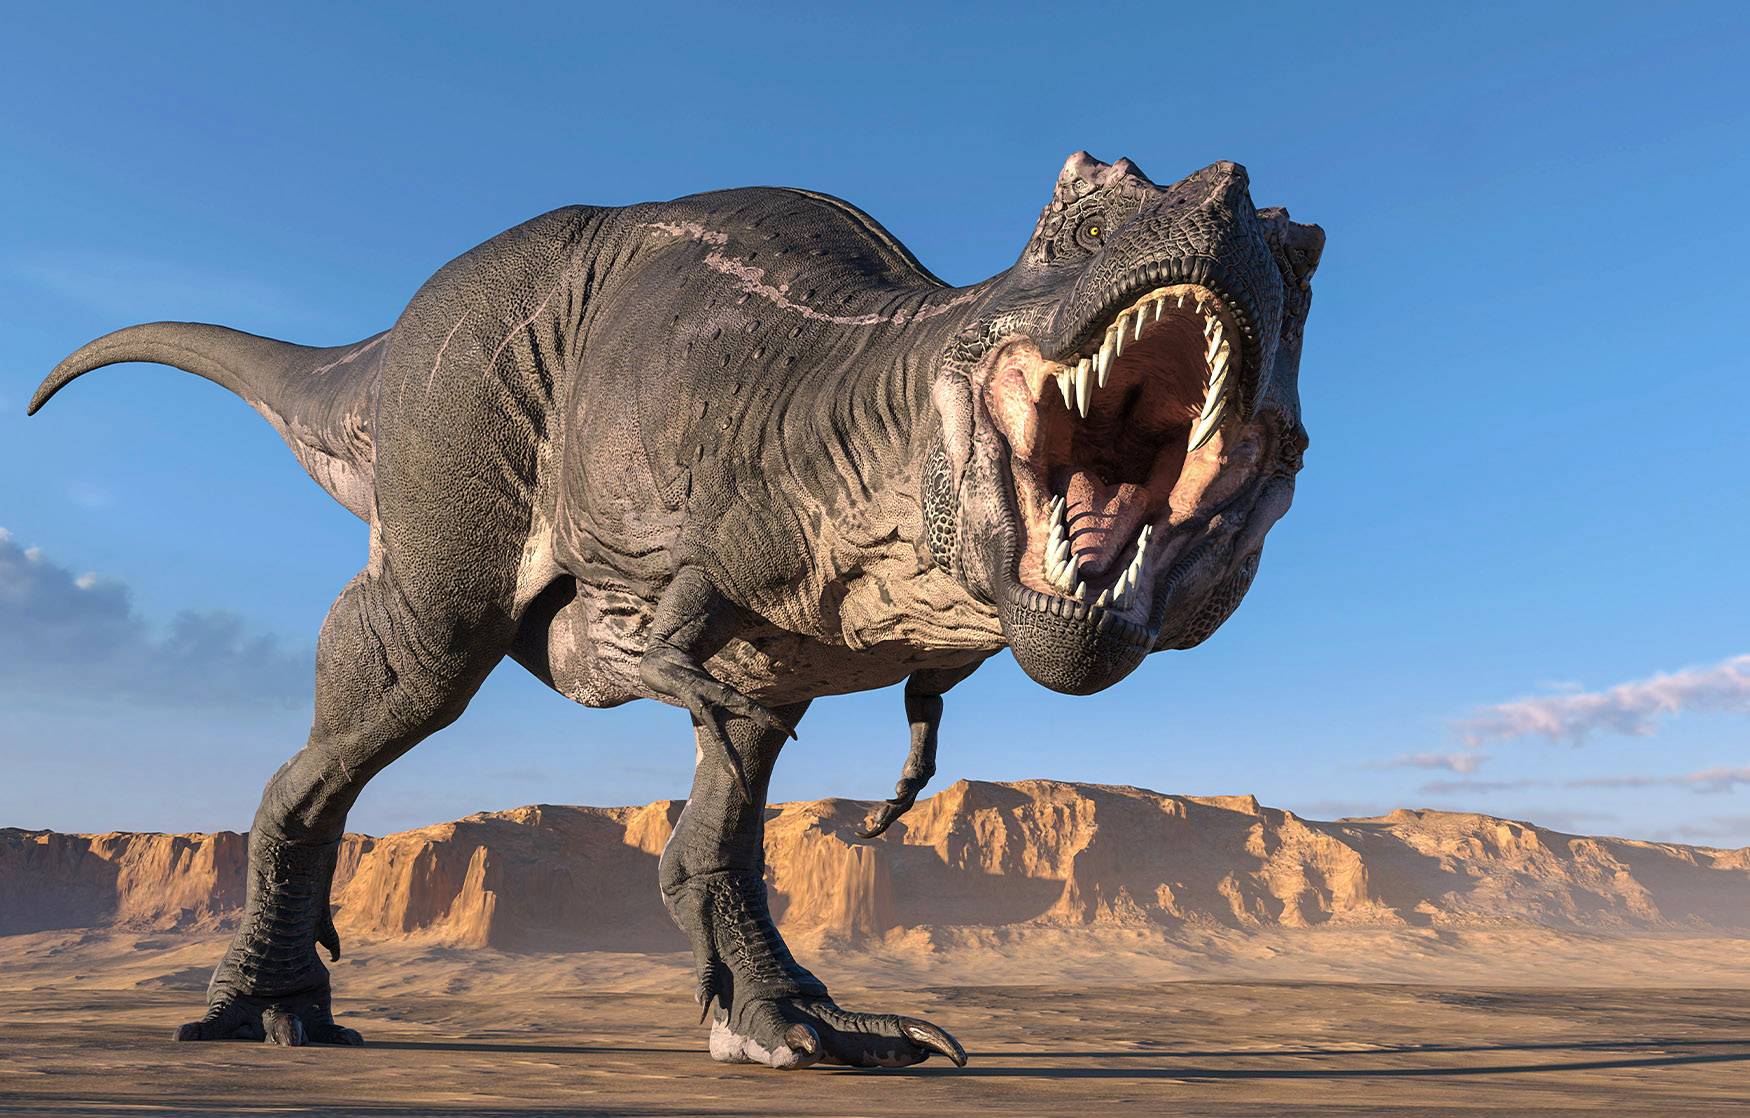 Recent look estimates comely assortment of T. rexes in Earth’s ancient previous